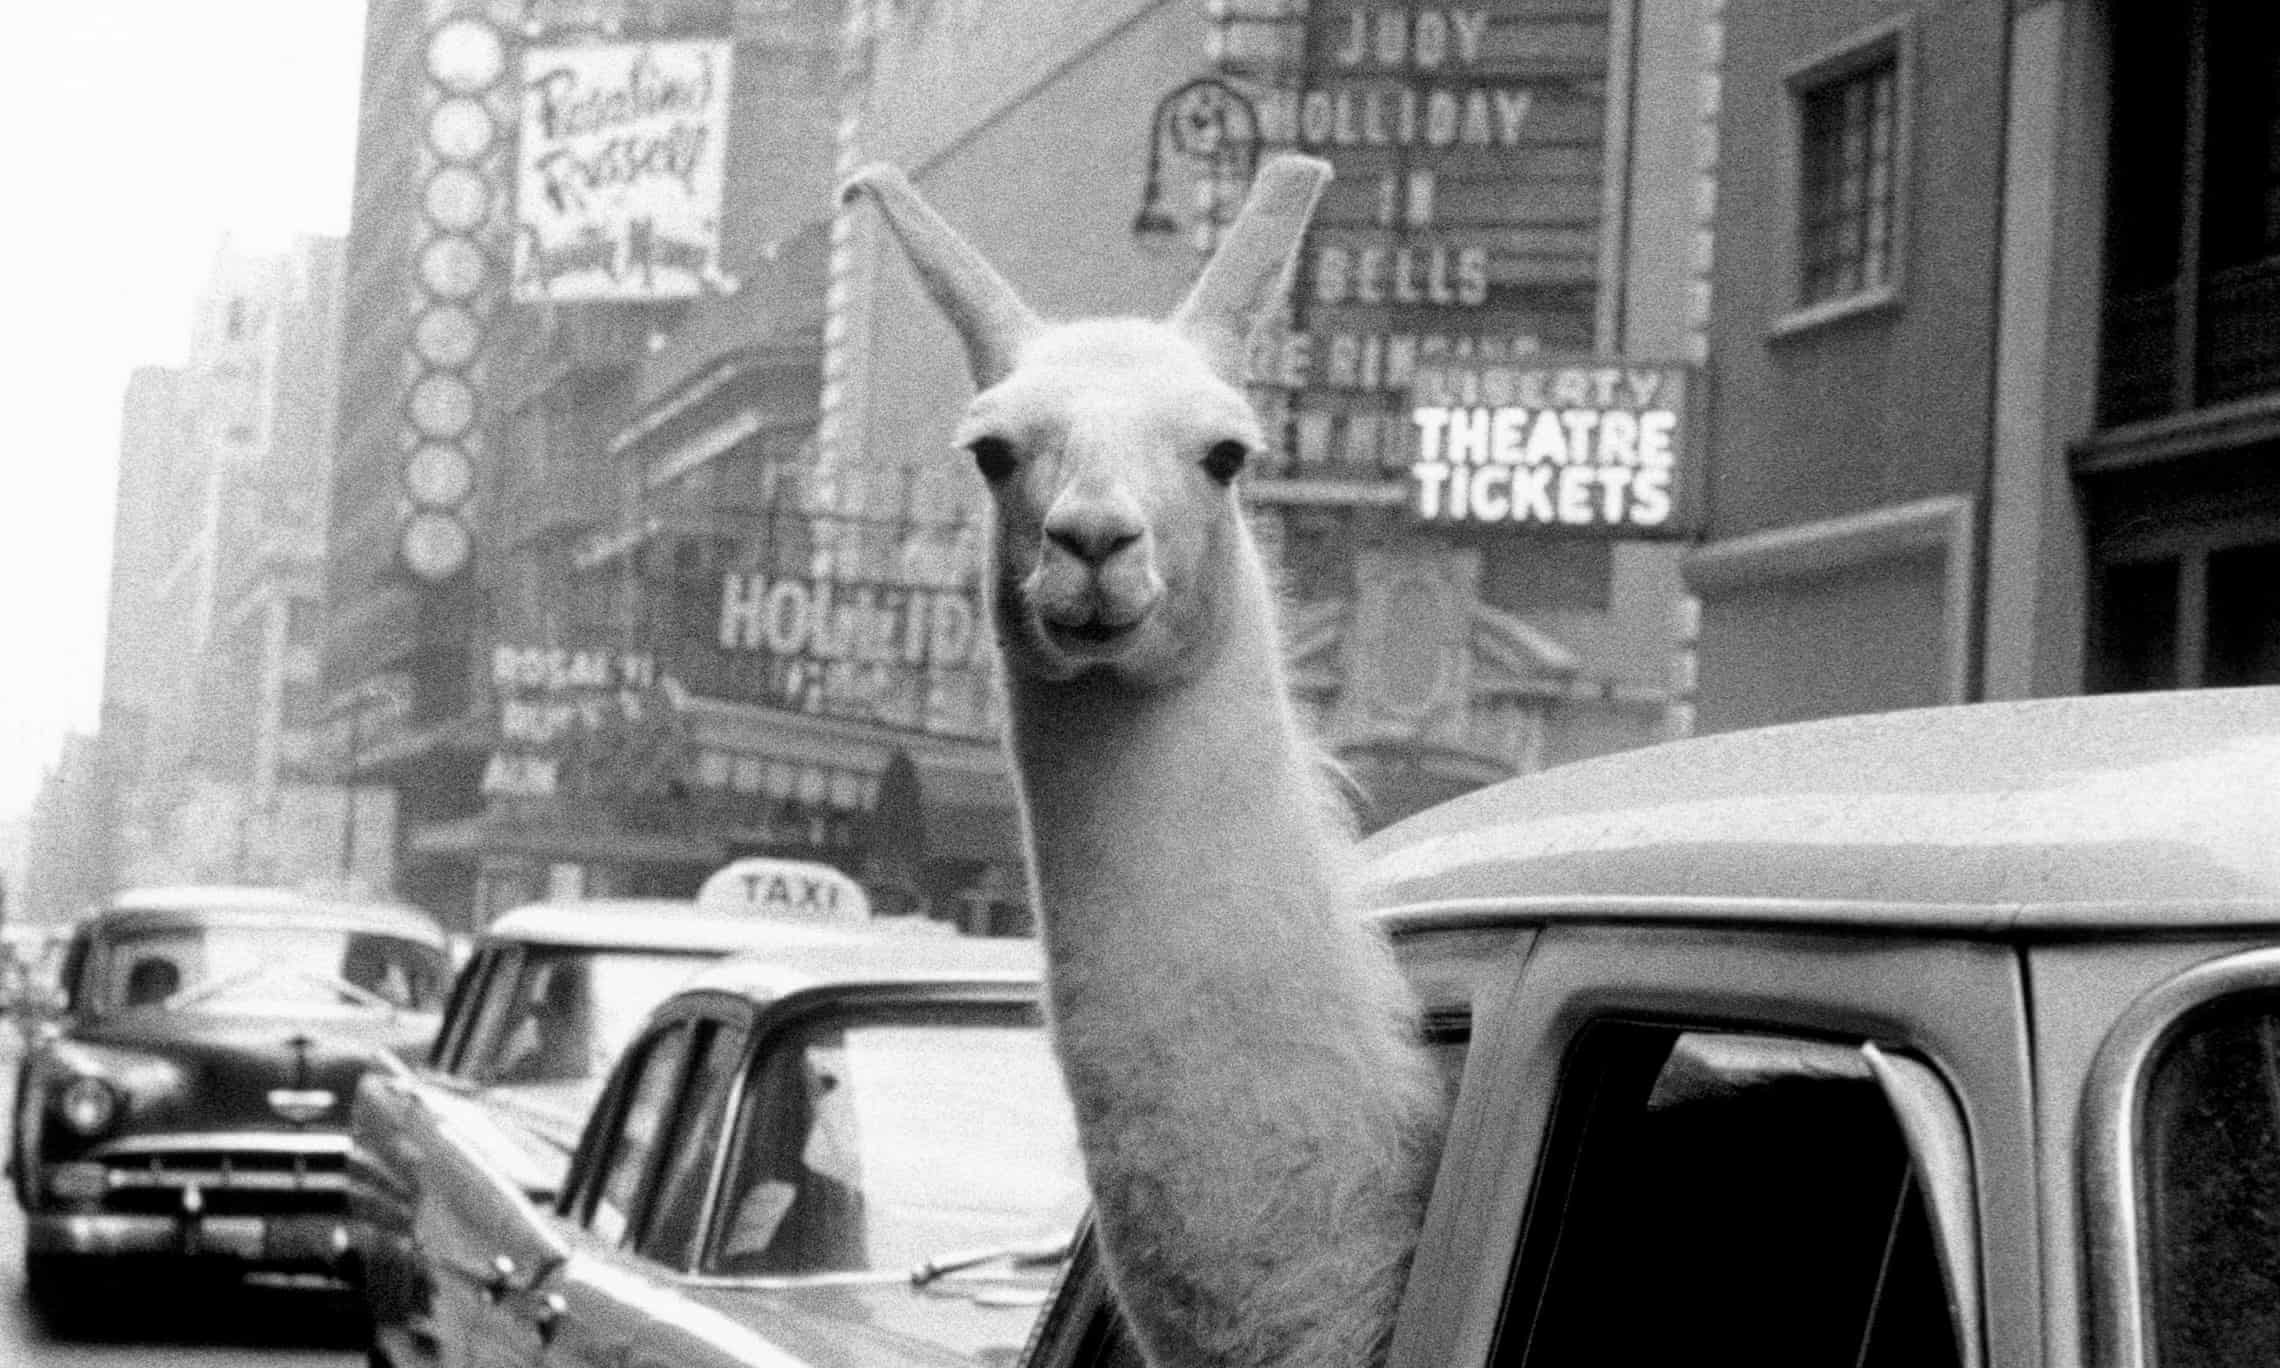 A llama in Times Square, New York, 1957 by Inge Morath